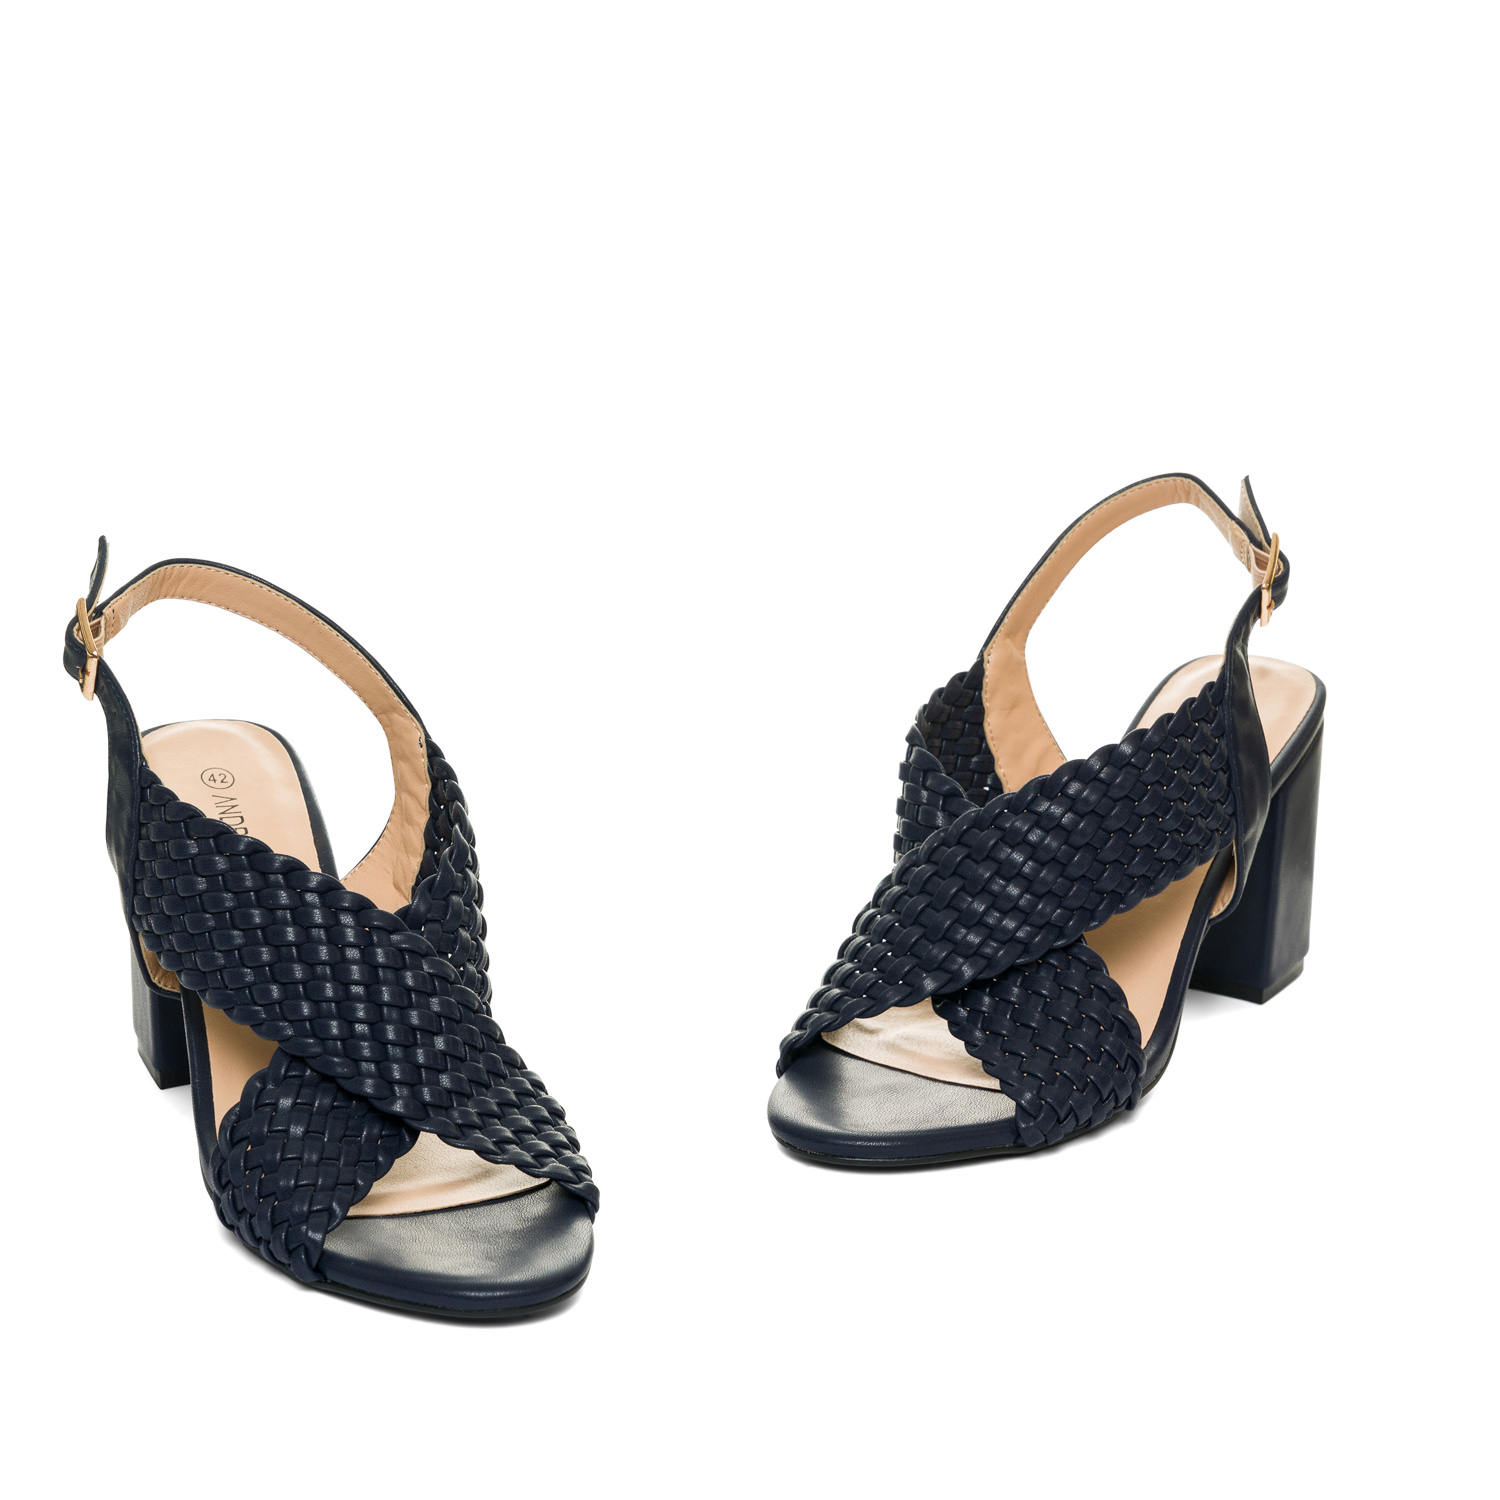 Braided navy faux leather sandals 